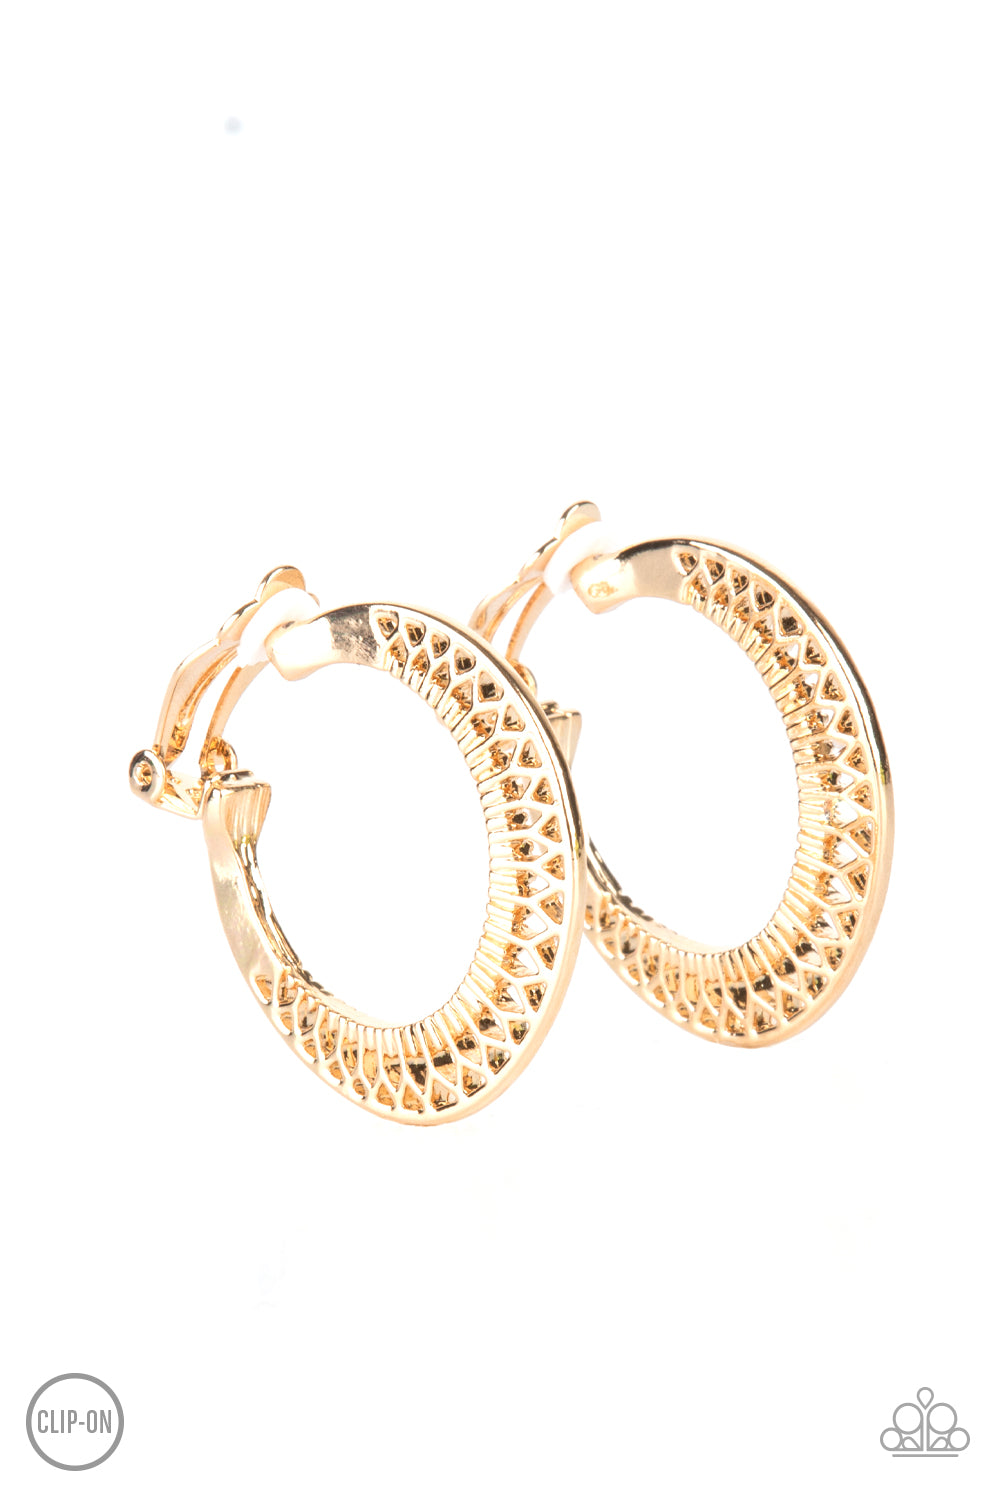 Moon Child Charisma - Gold Clip-on Earrings - Paparazzi Accessories - GlaMarous Titi Jewels